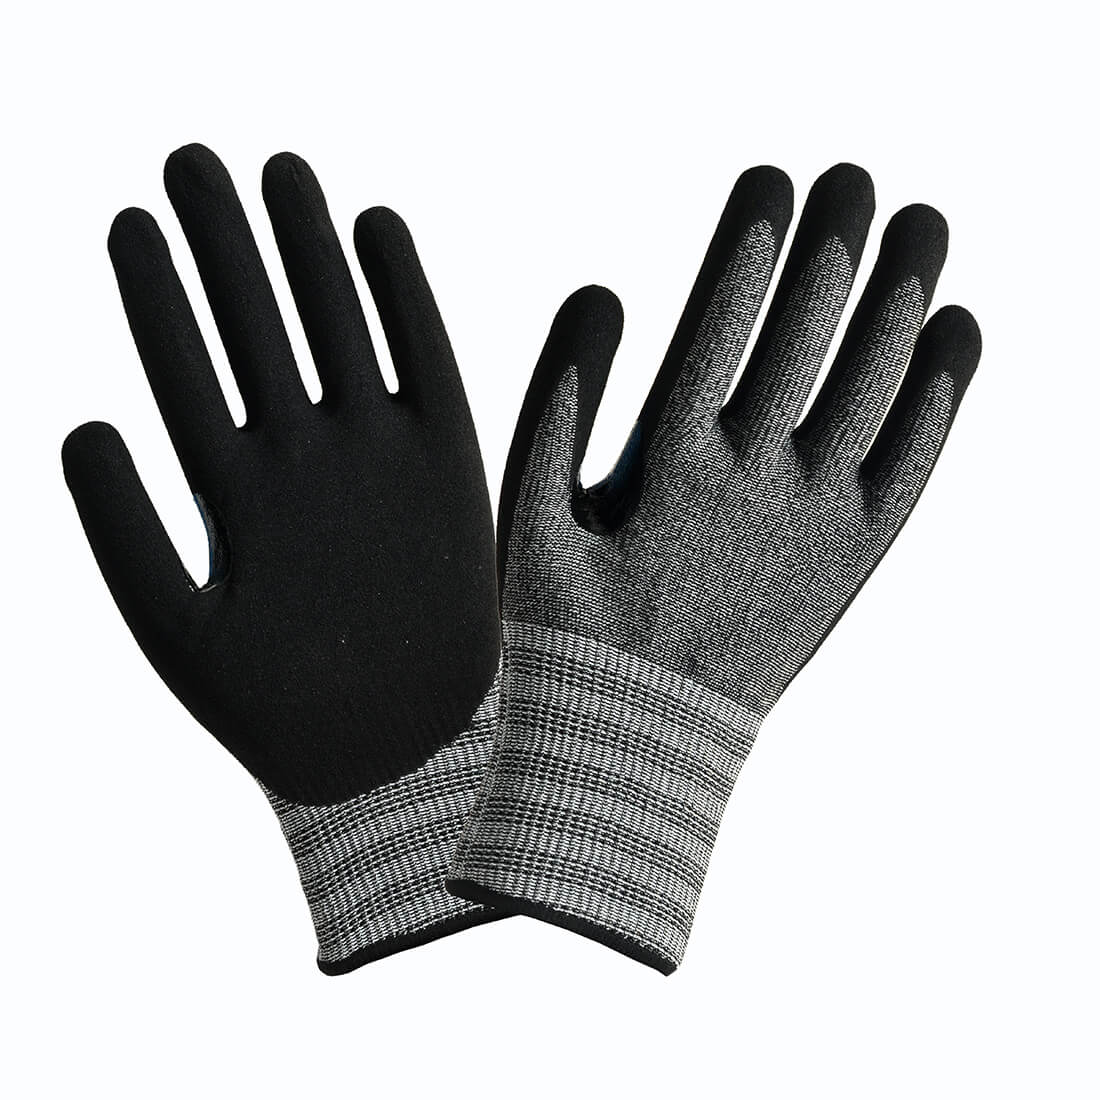 Supply OEM/ODM China Fashion Design Latex Coated Anti-Cutting Gloves Featured Image